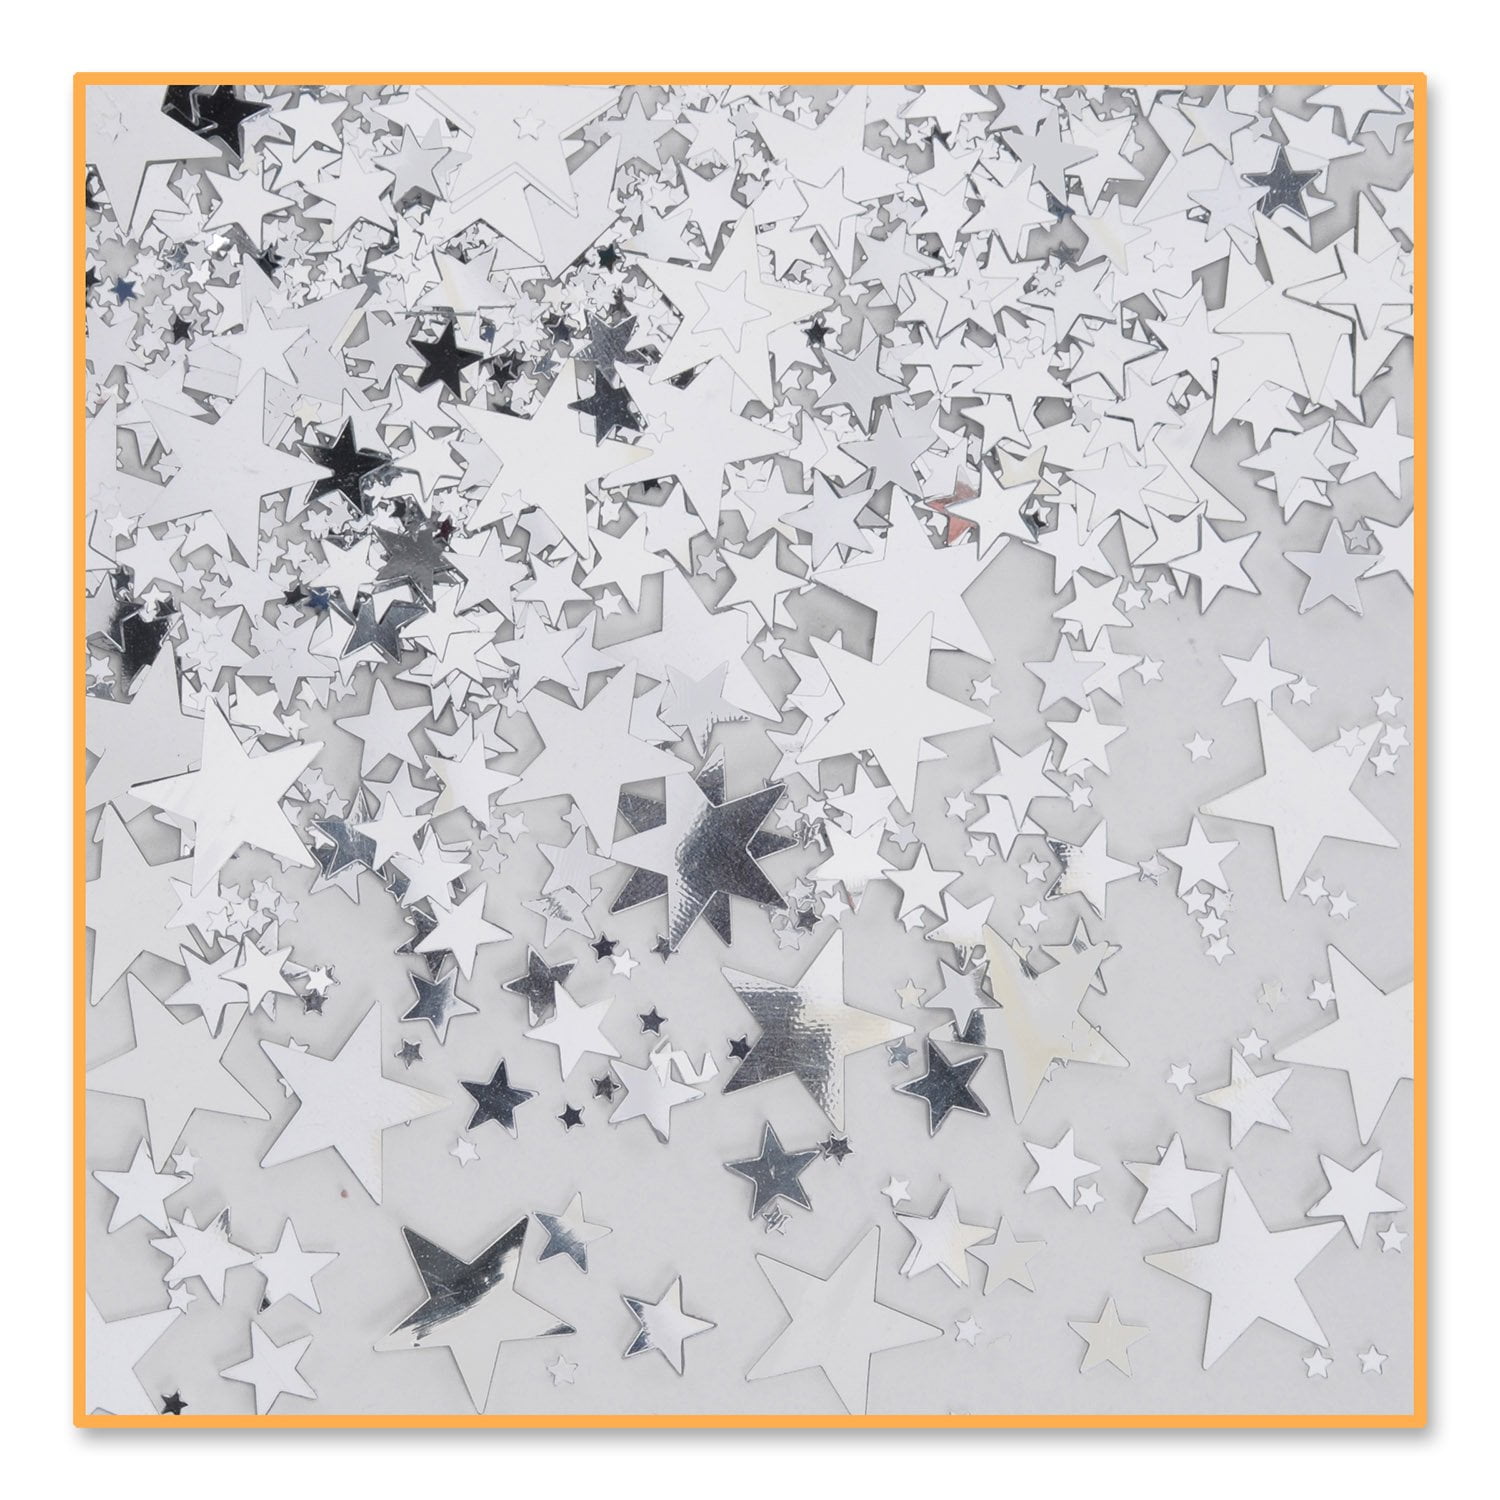 Beistle CN131 Silver Stars Confetti Value 3-Pack 1/2-Ounce 